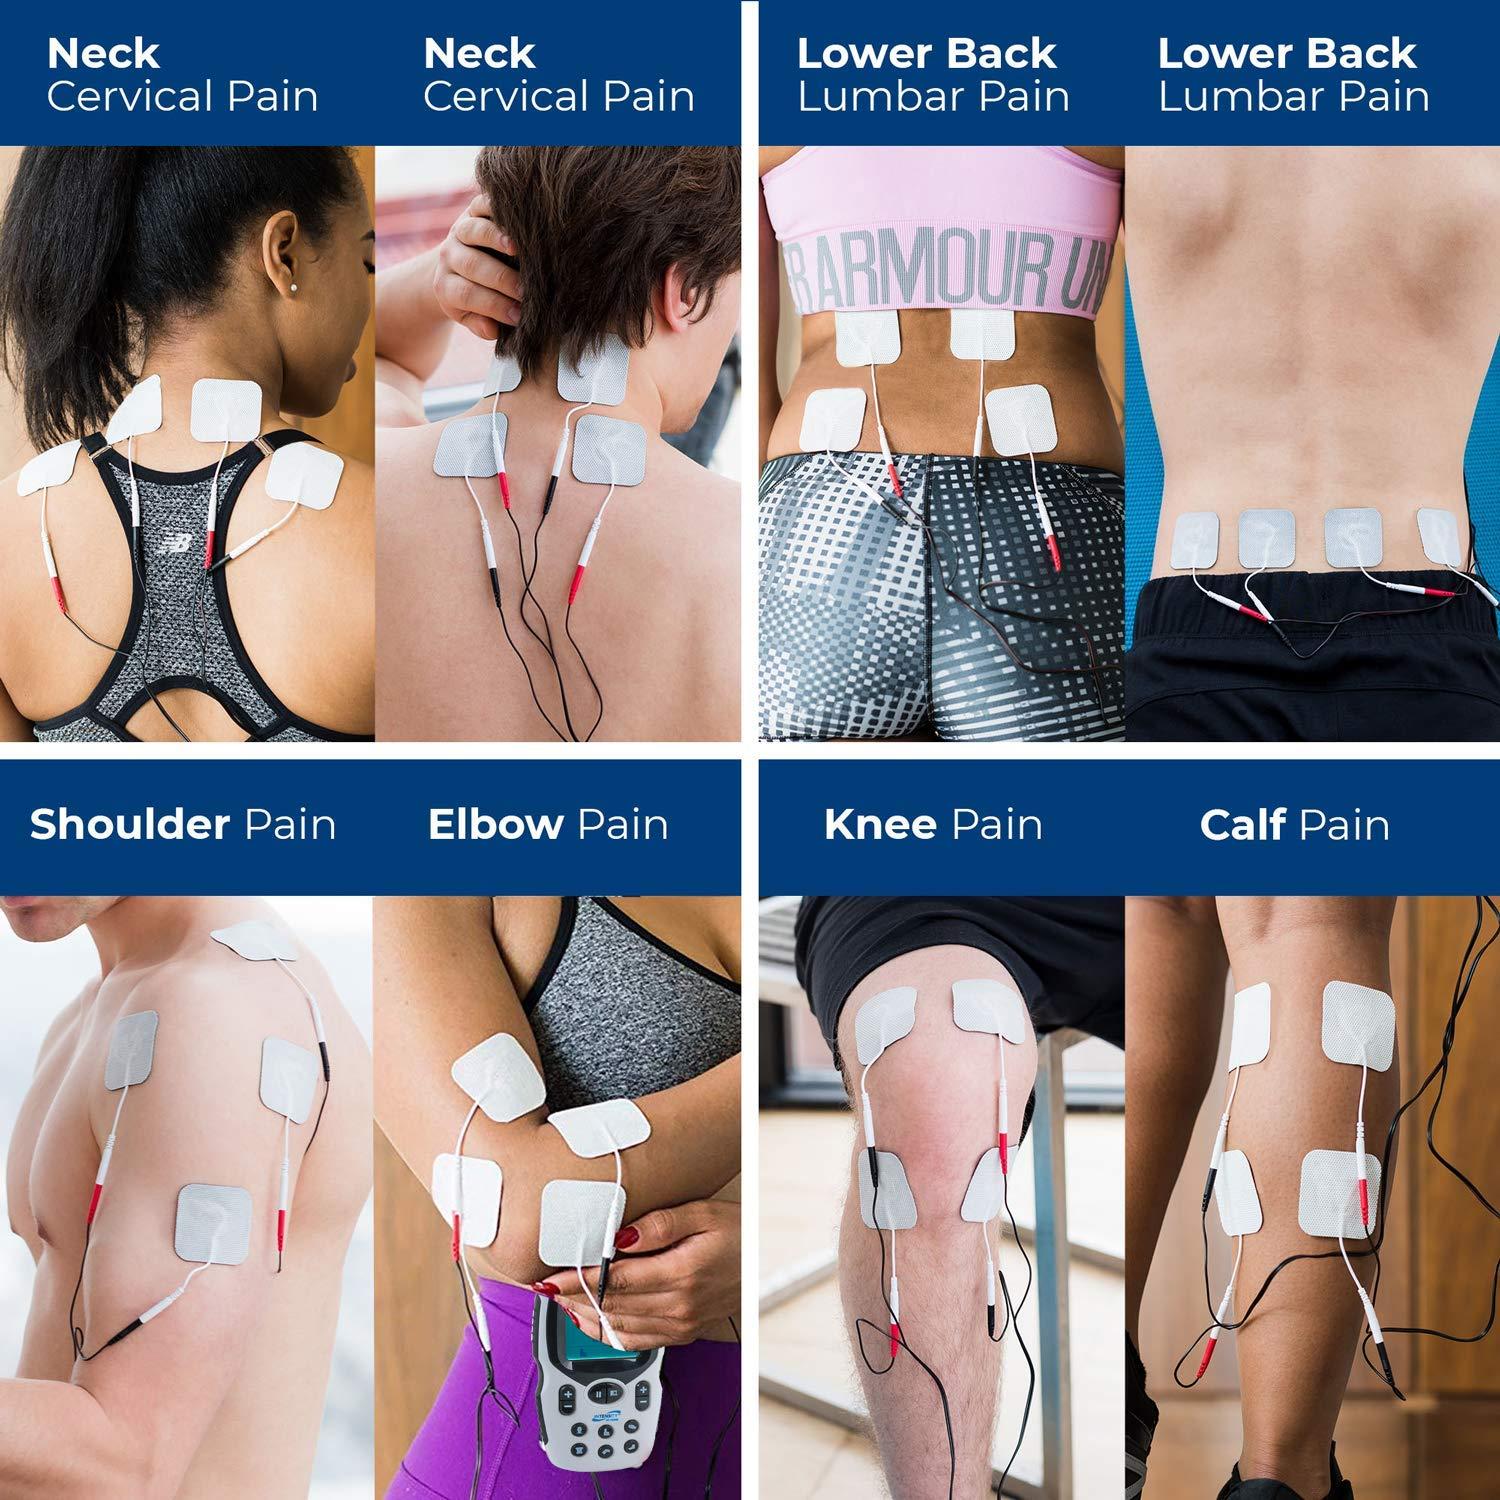 Use a TENS Machine for Back Pain - Electrohealth